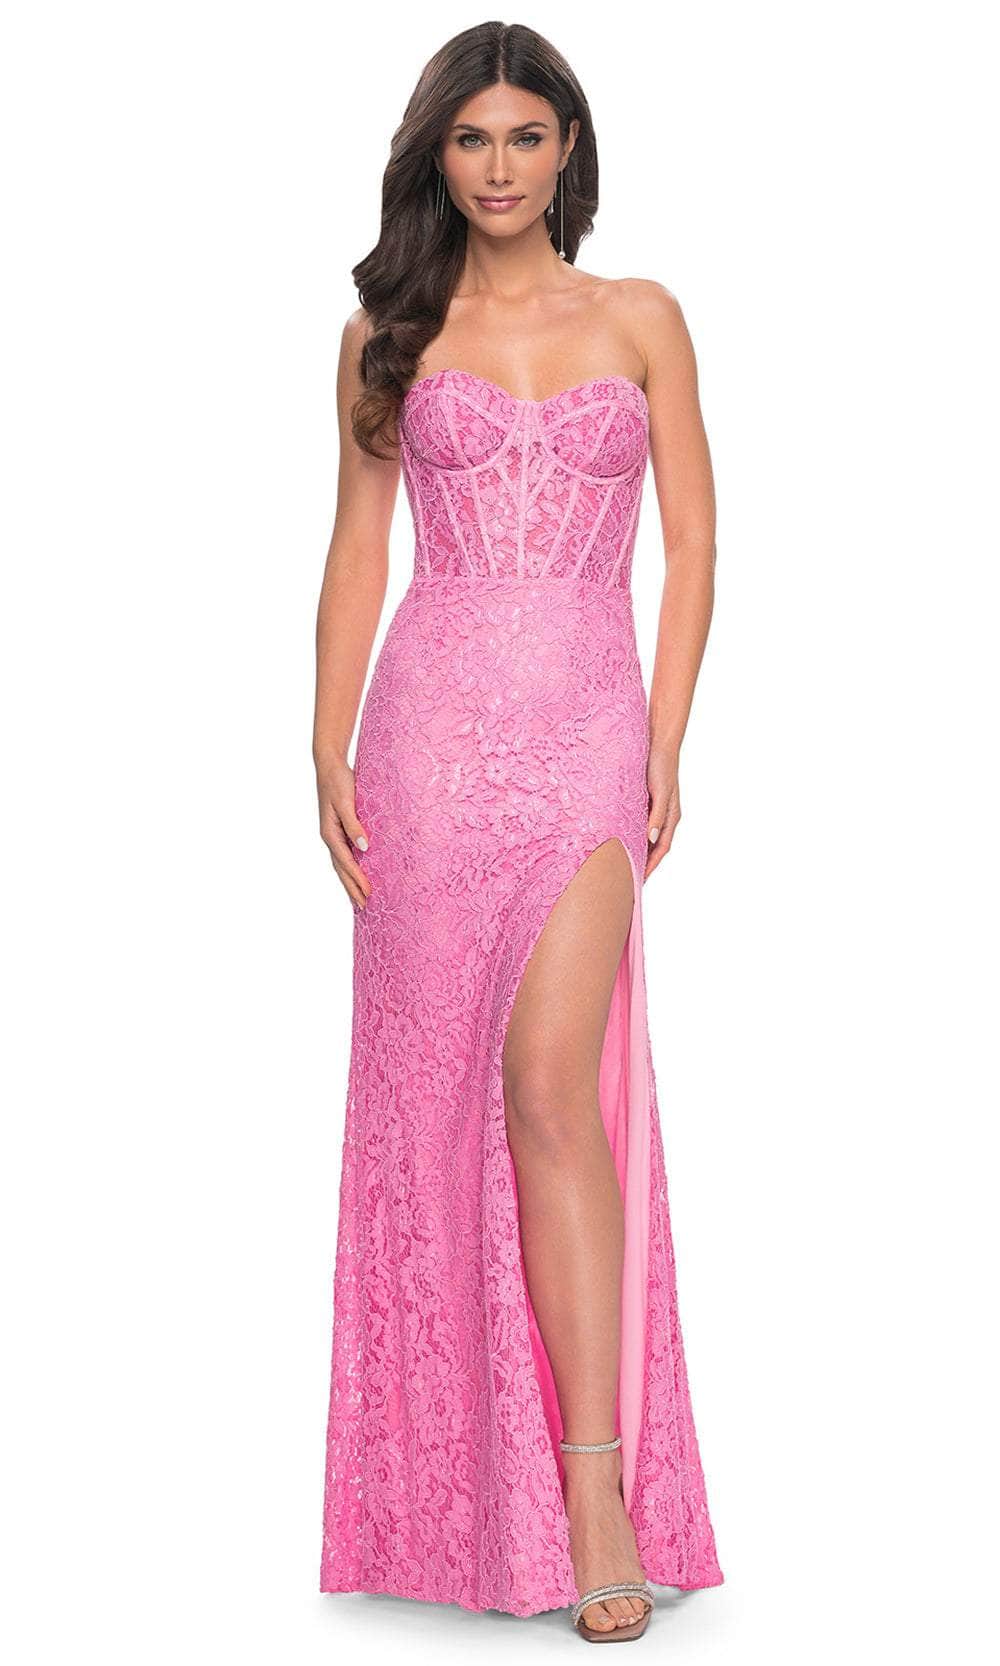 La Femme 32298 - Strapless Sweetheart Prom Gown Prom Dresses 00 / Pink